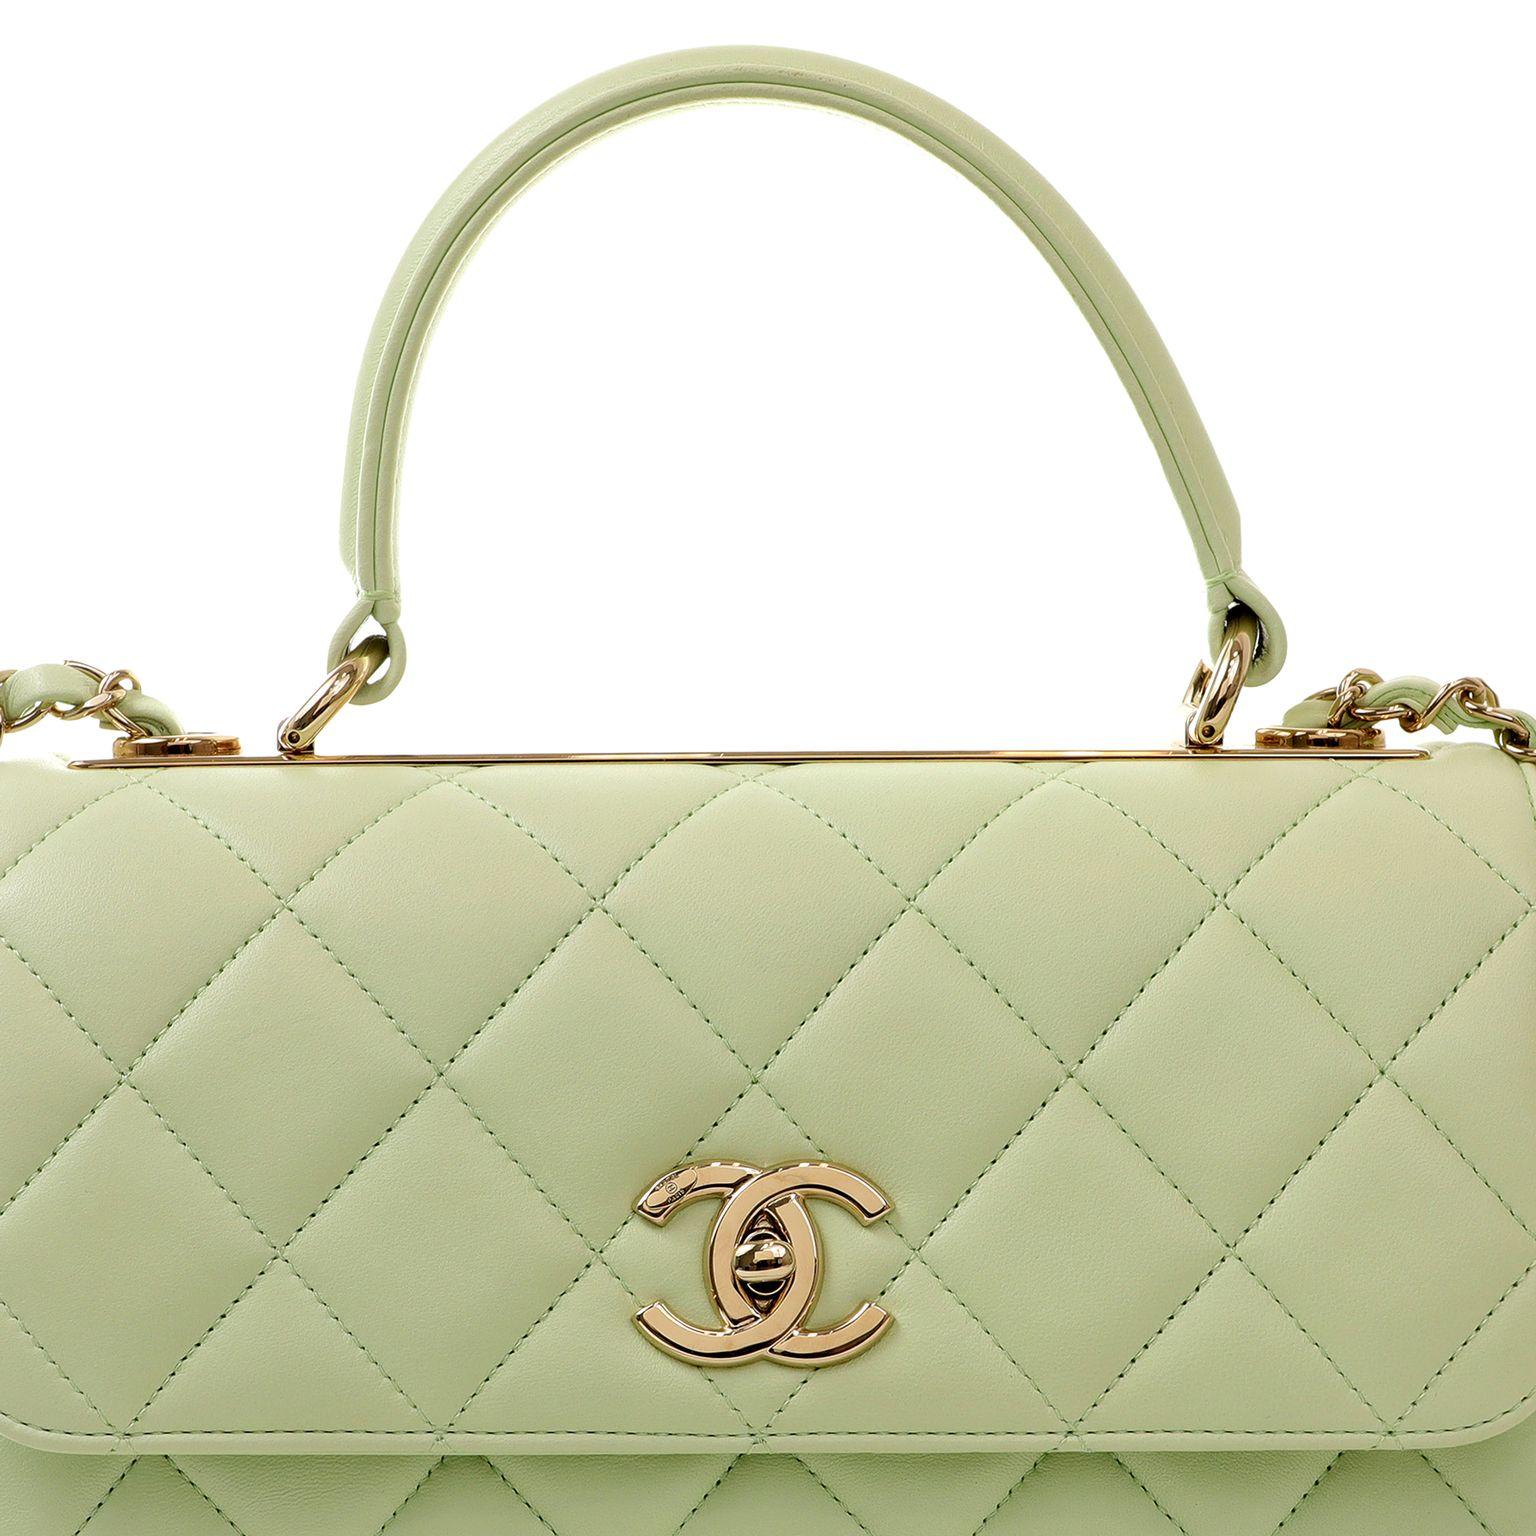 This authentic Chanel Seafoam Green Lambskin Coco Handle Flap Bag is in pristine condition.  Elegant and sophisticated, the Coco handle is an exquisite departure from the Classic Flap silhouette. 

Soft pastel green lambskin is quilted in signature